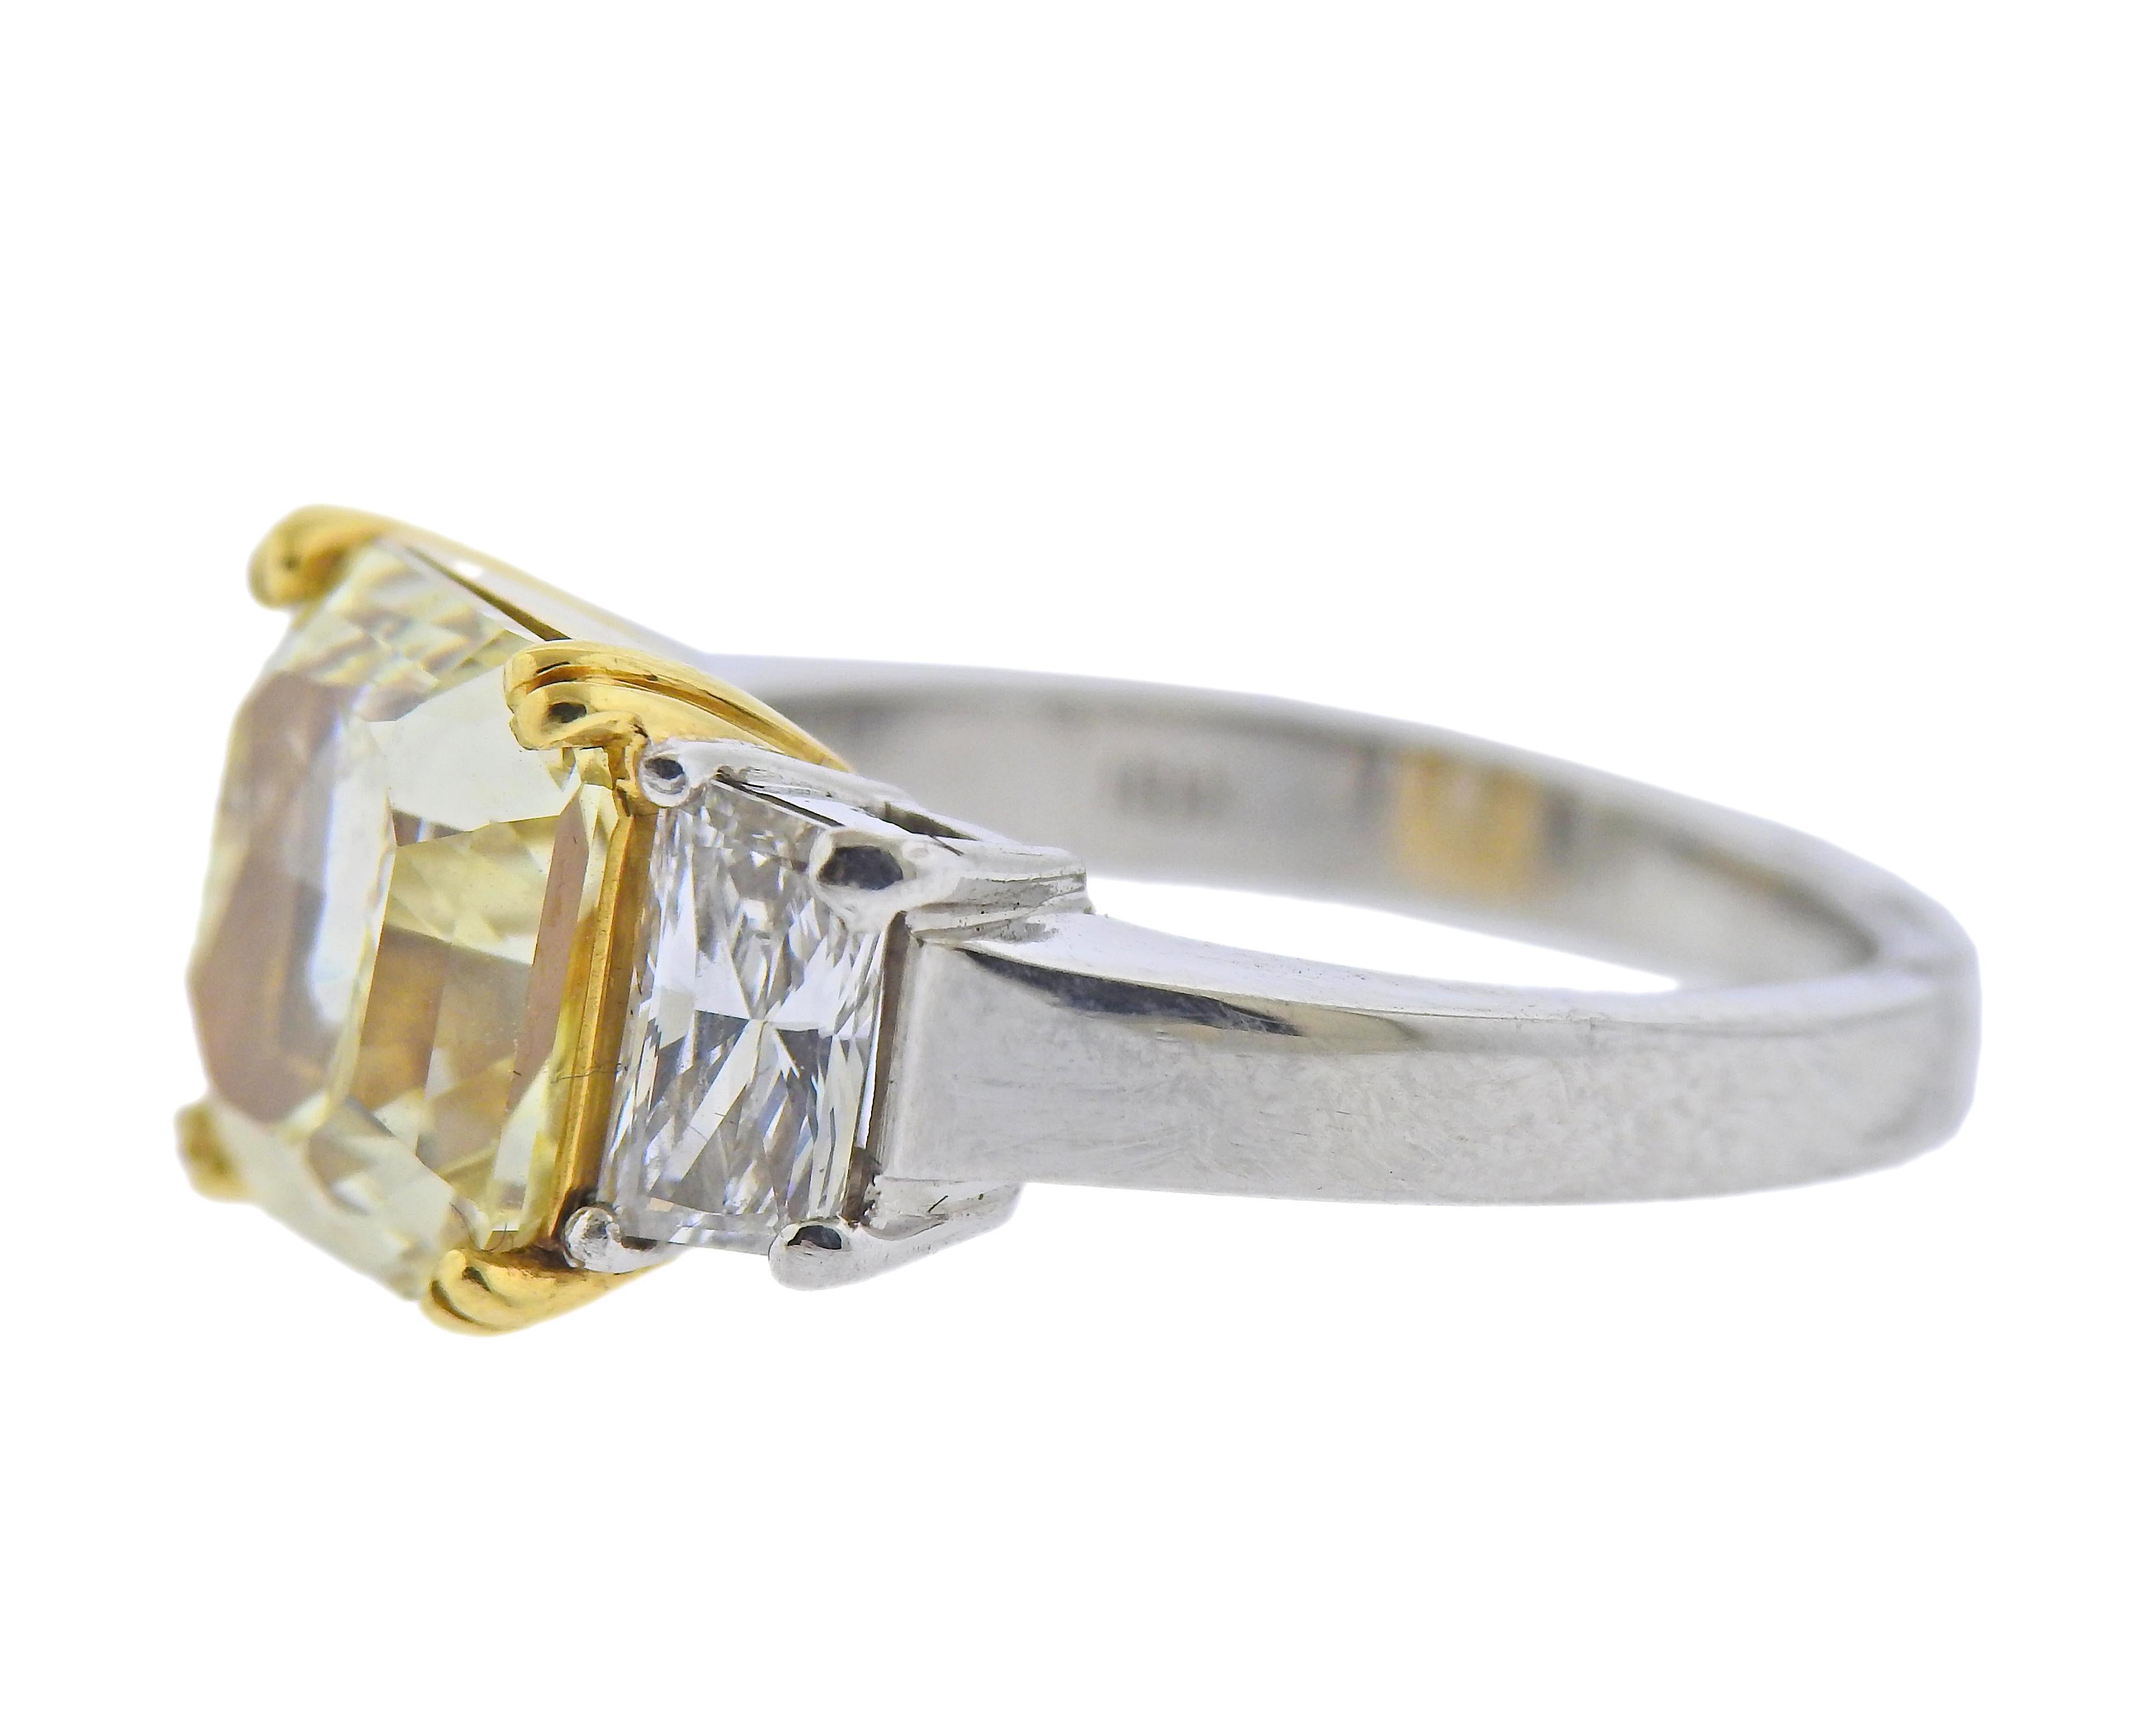 Mixed Cut GIA 4.04 Carat Fancy Yellow VS1 Diamond Platinum Gold Engagement Ring For Sale